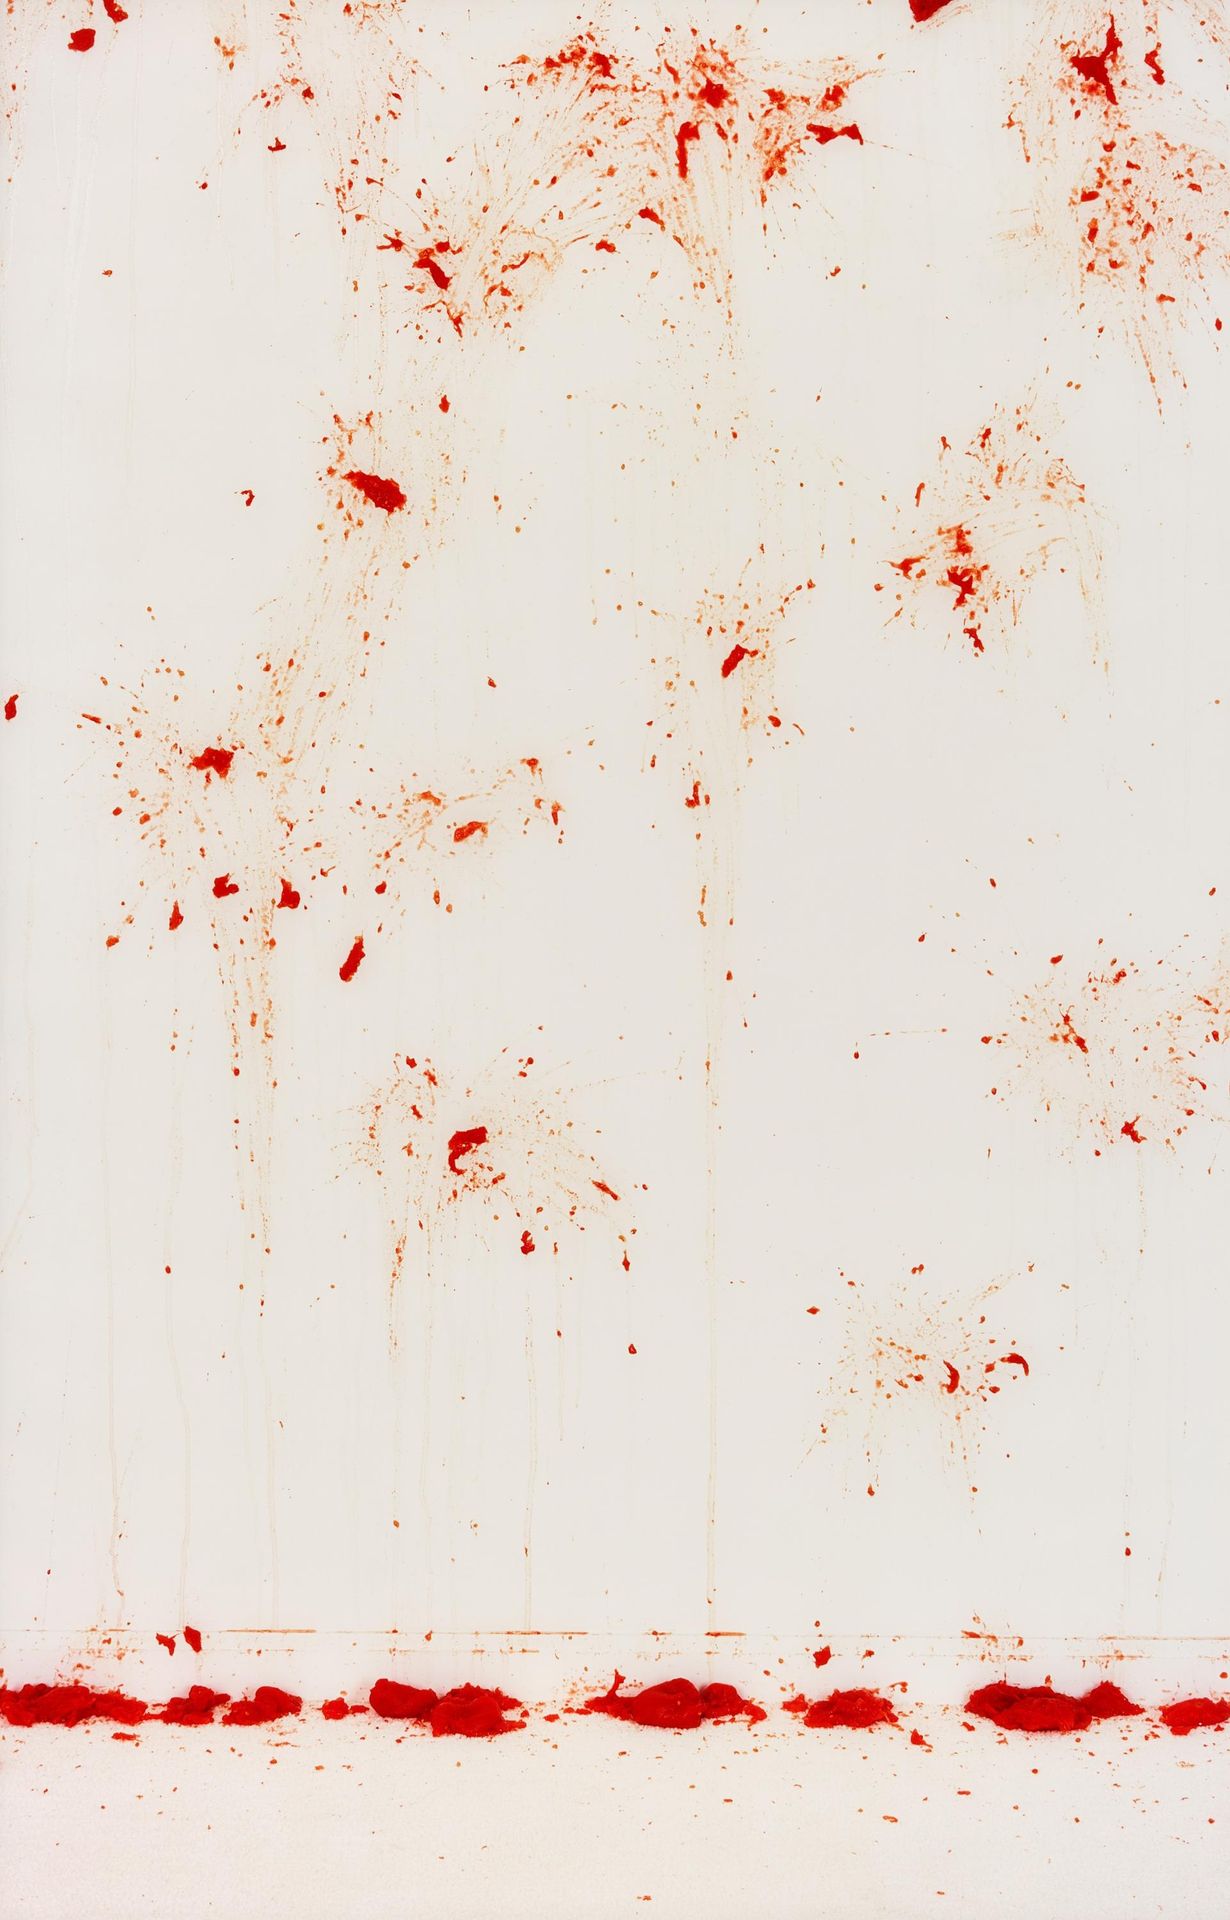 Jeanne Dunning DUNNING, JEANNE
1960 Granby, CT/USA

Titolo: "Splatter 2". 
Data:&hellip;